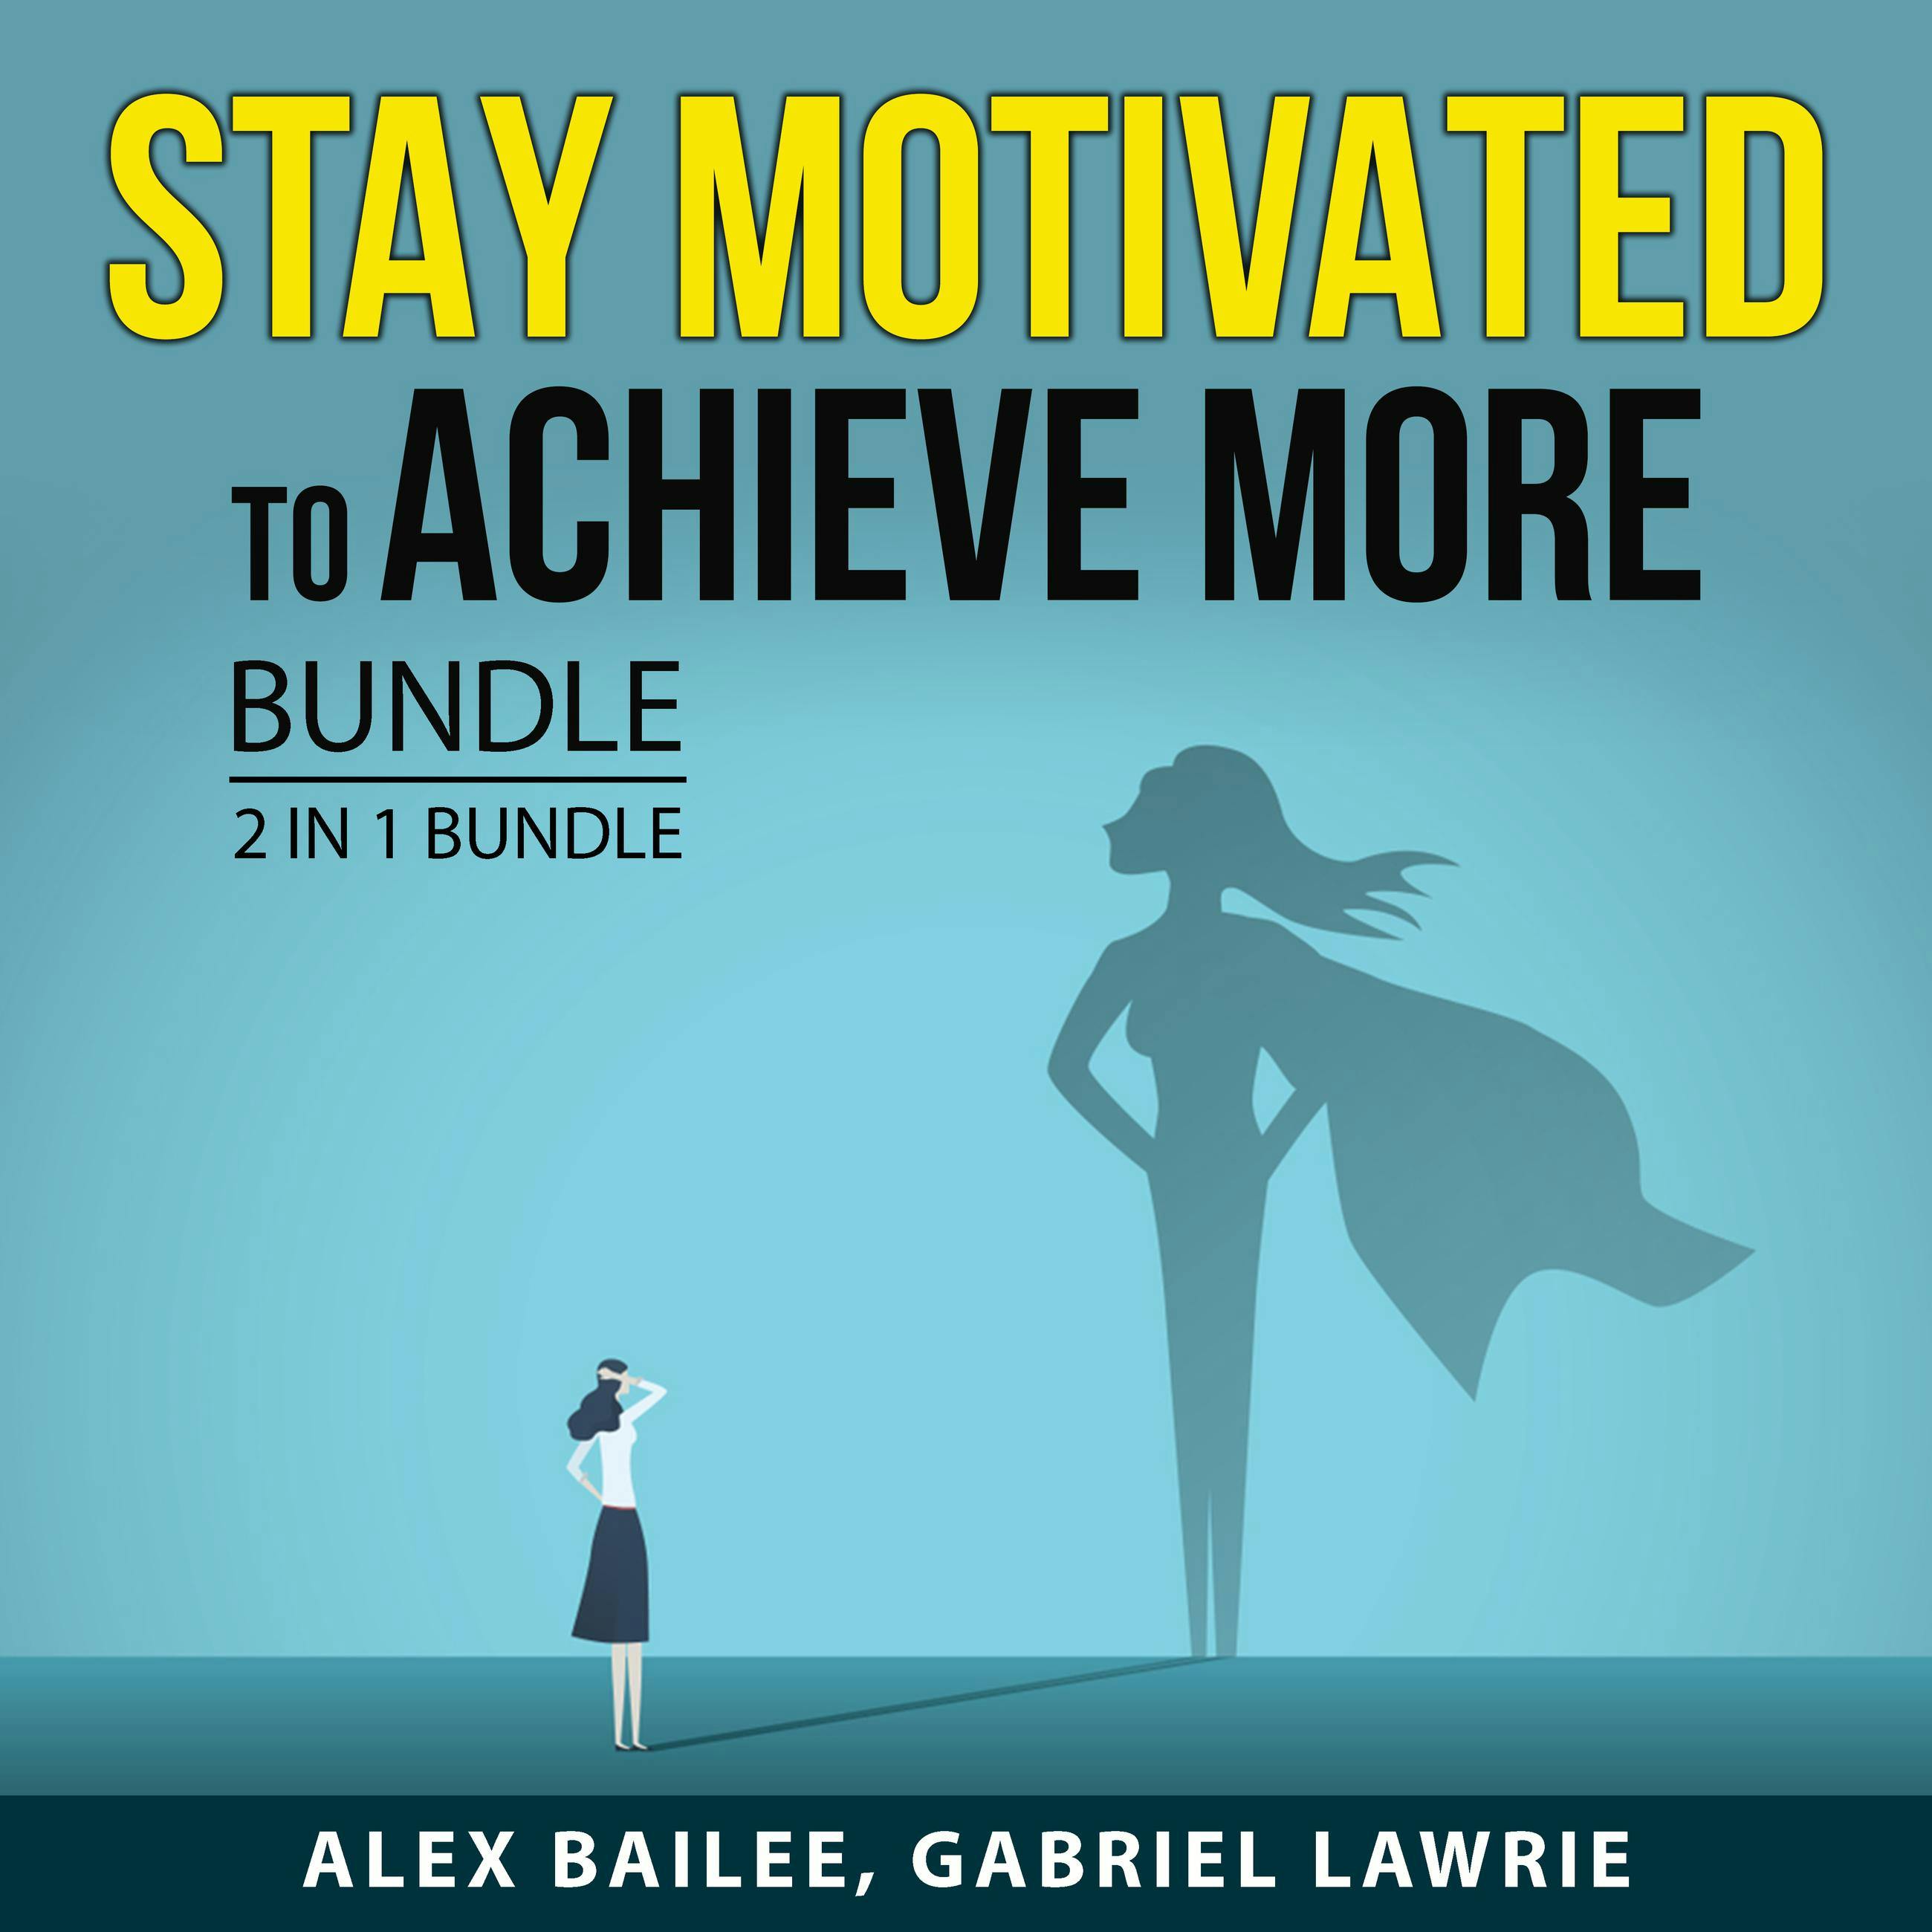 Stay Motivated to Achieve More Bundle, 2 in 1 Bundle: Your Best Life and Inspirational Motivation - Gabriel Lawrie, Alex Bailee